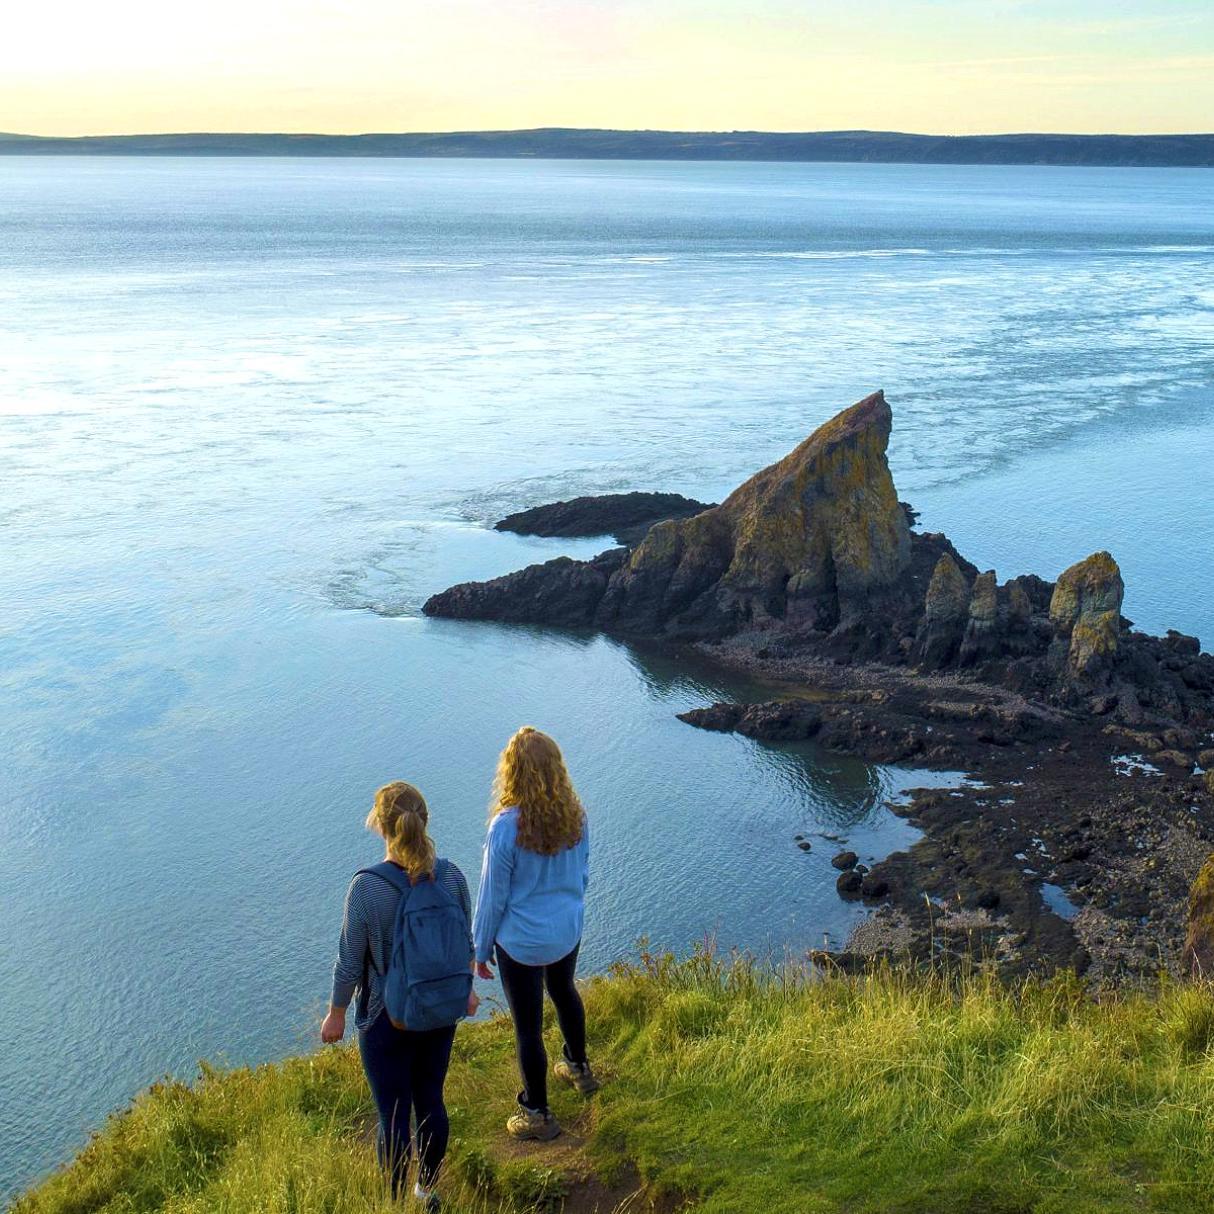 2 people look out over a coastal cliff